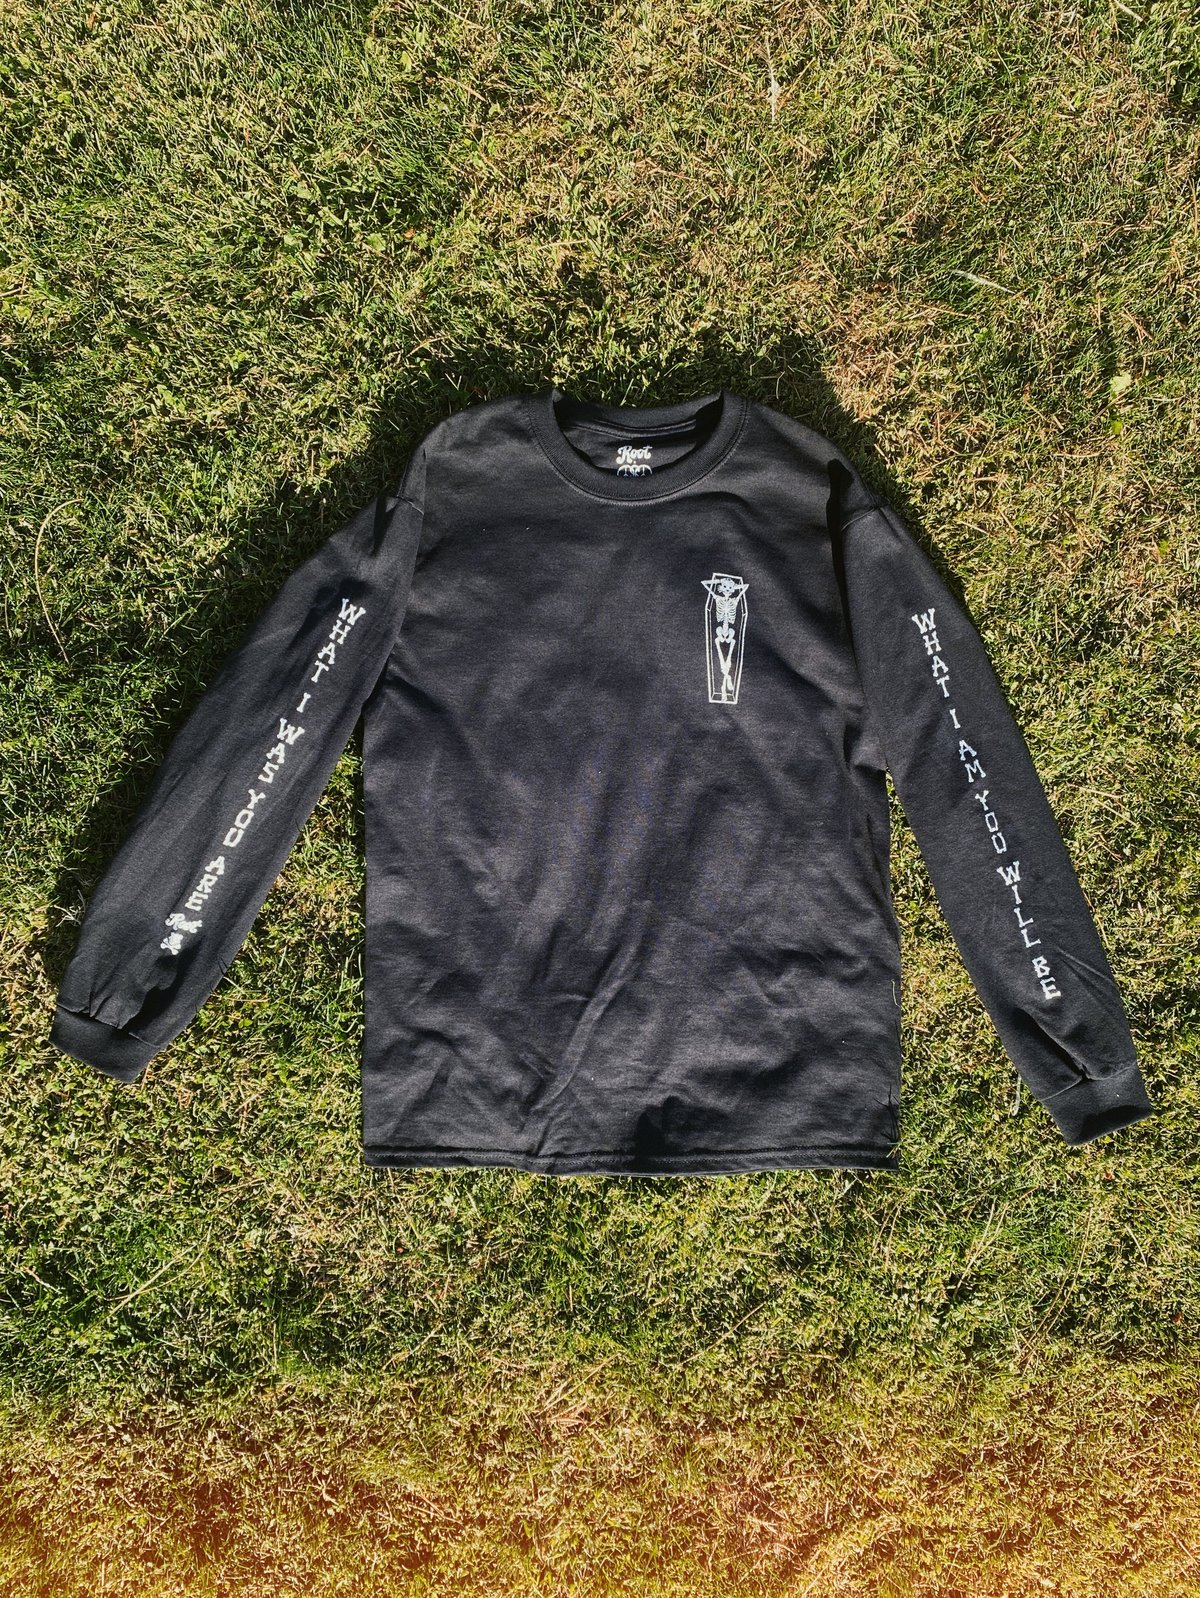 THE MORGUE 2 | OSO x ROOT | Longsleeve & More